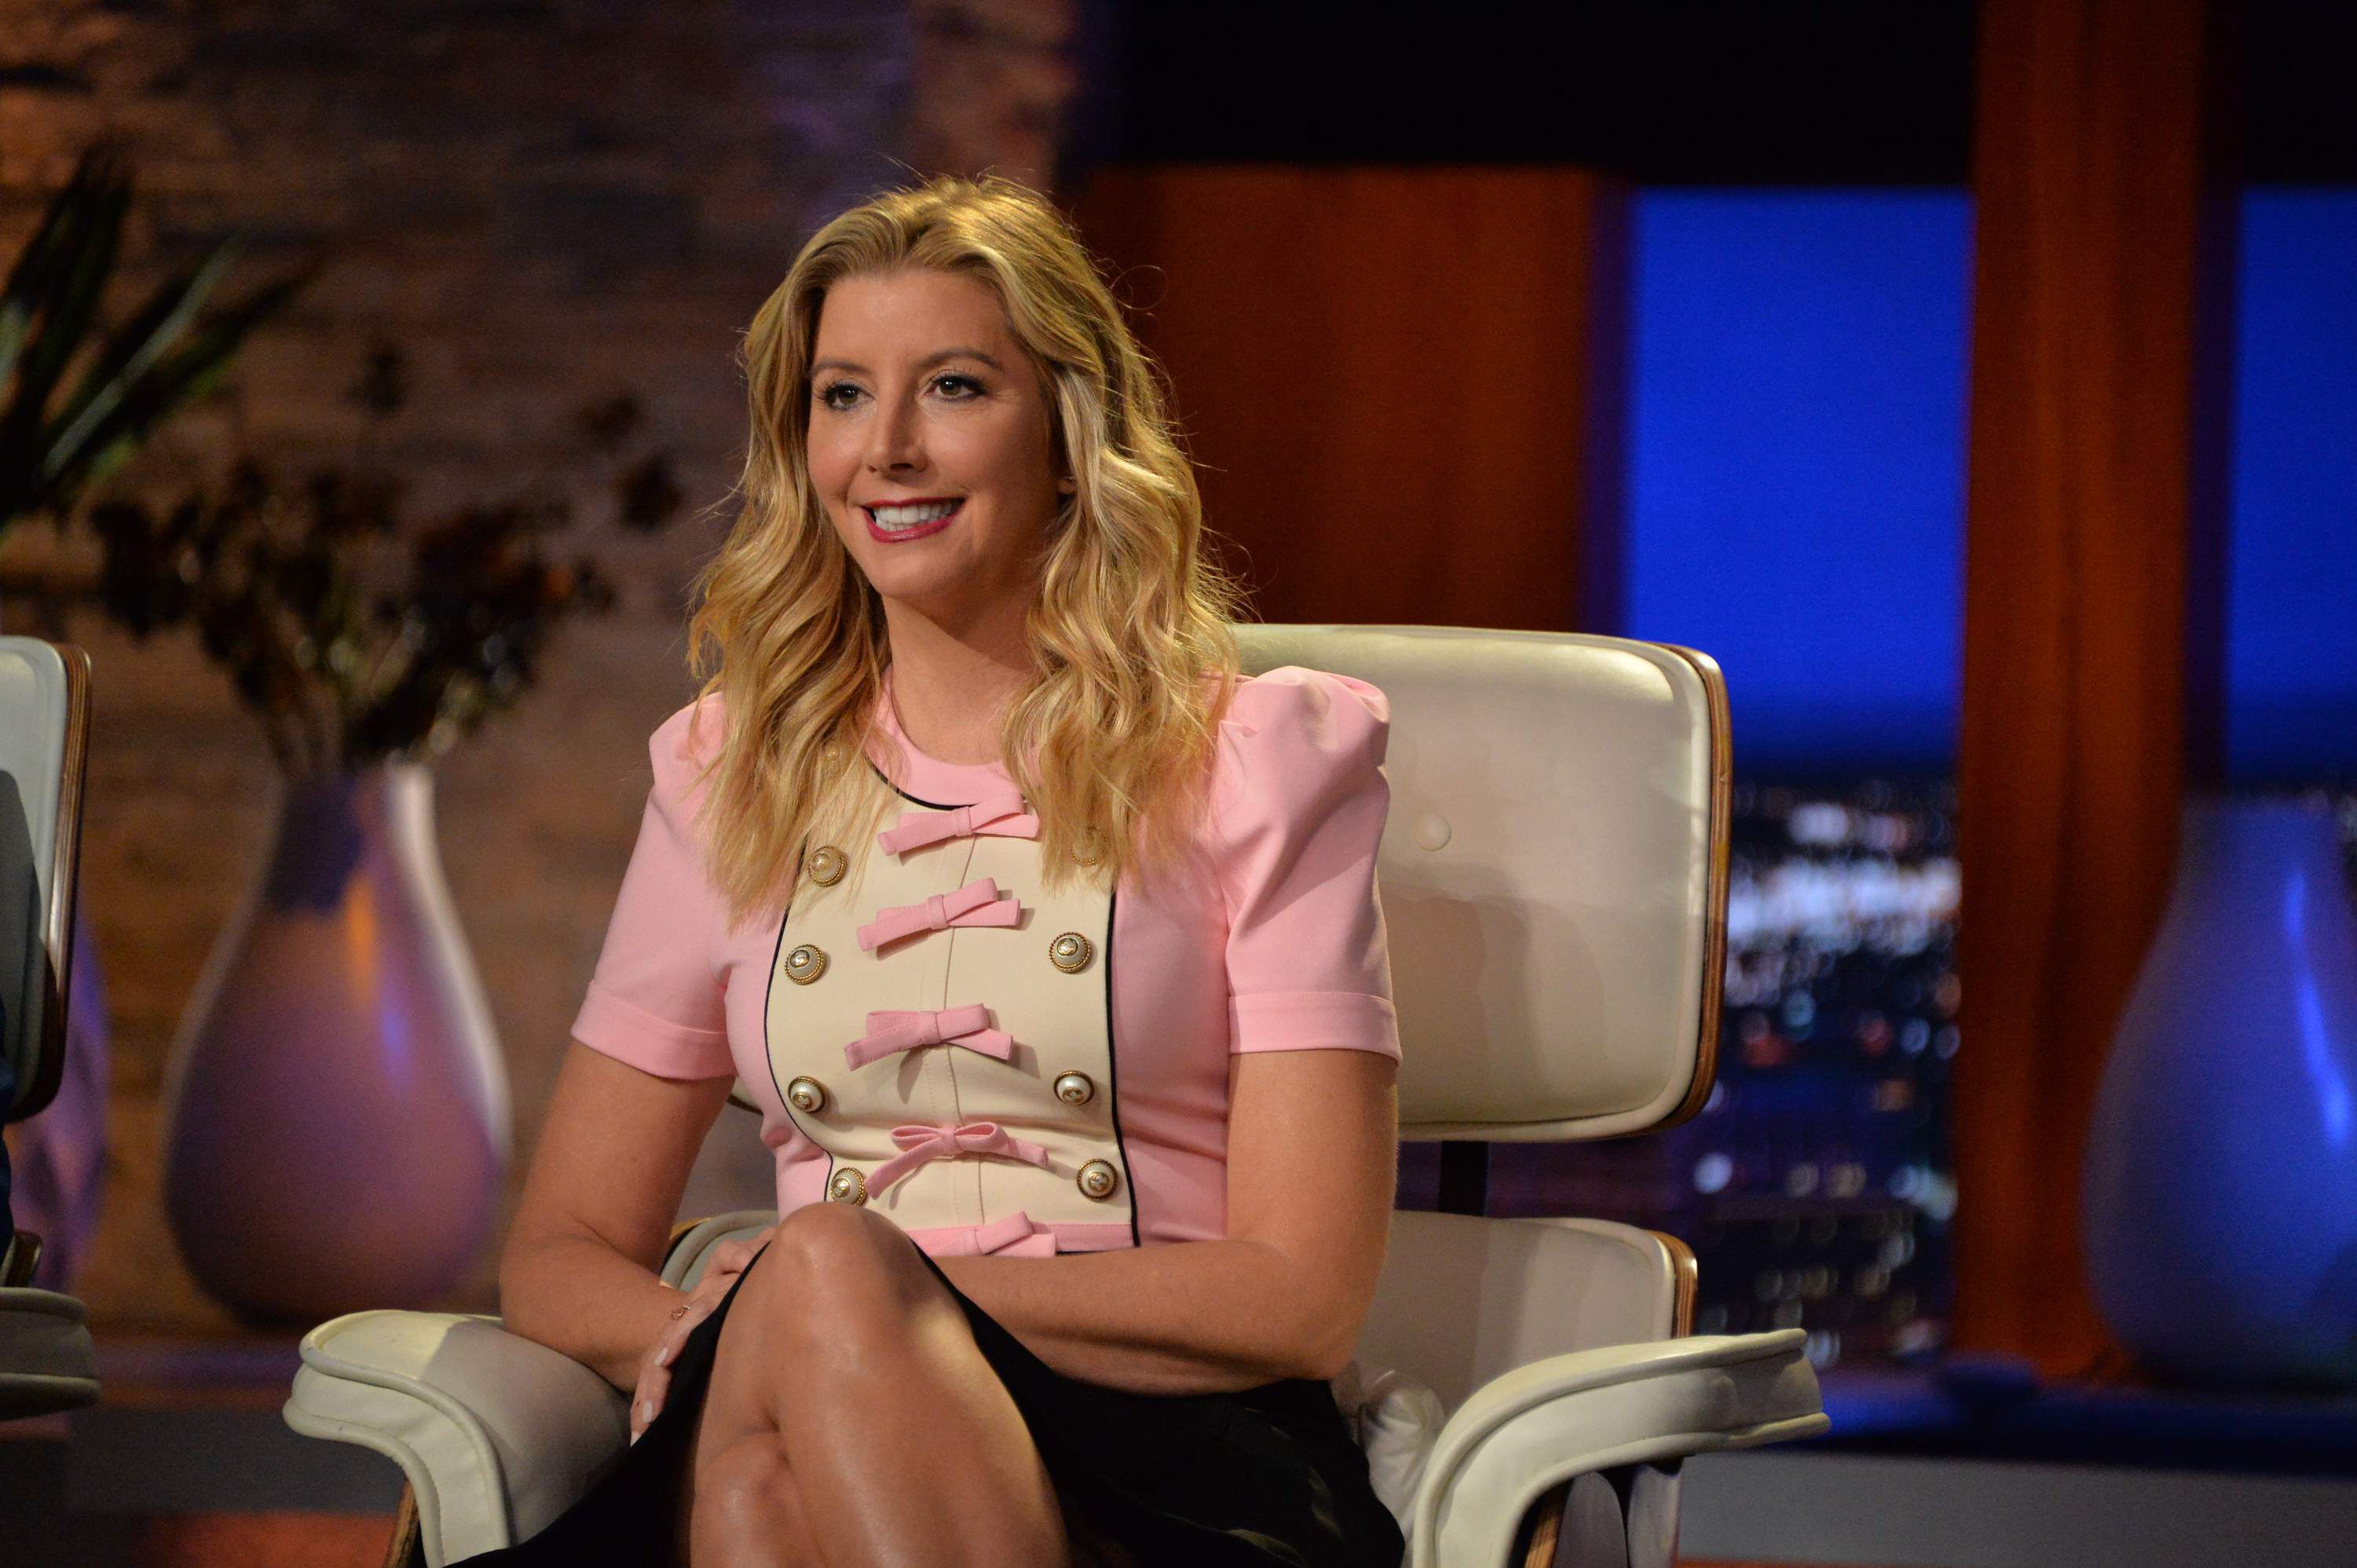 Clearwater's Sara Blakely among investors in $150M fund for startups